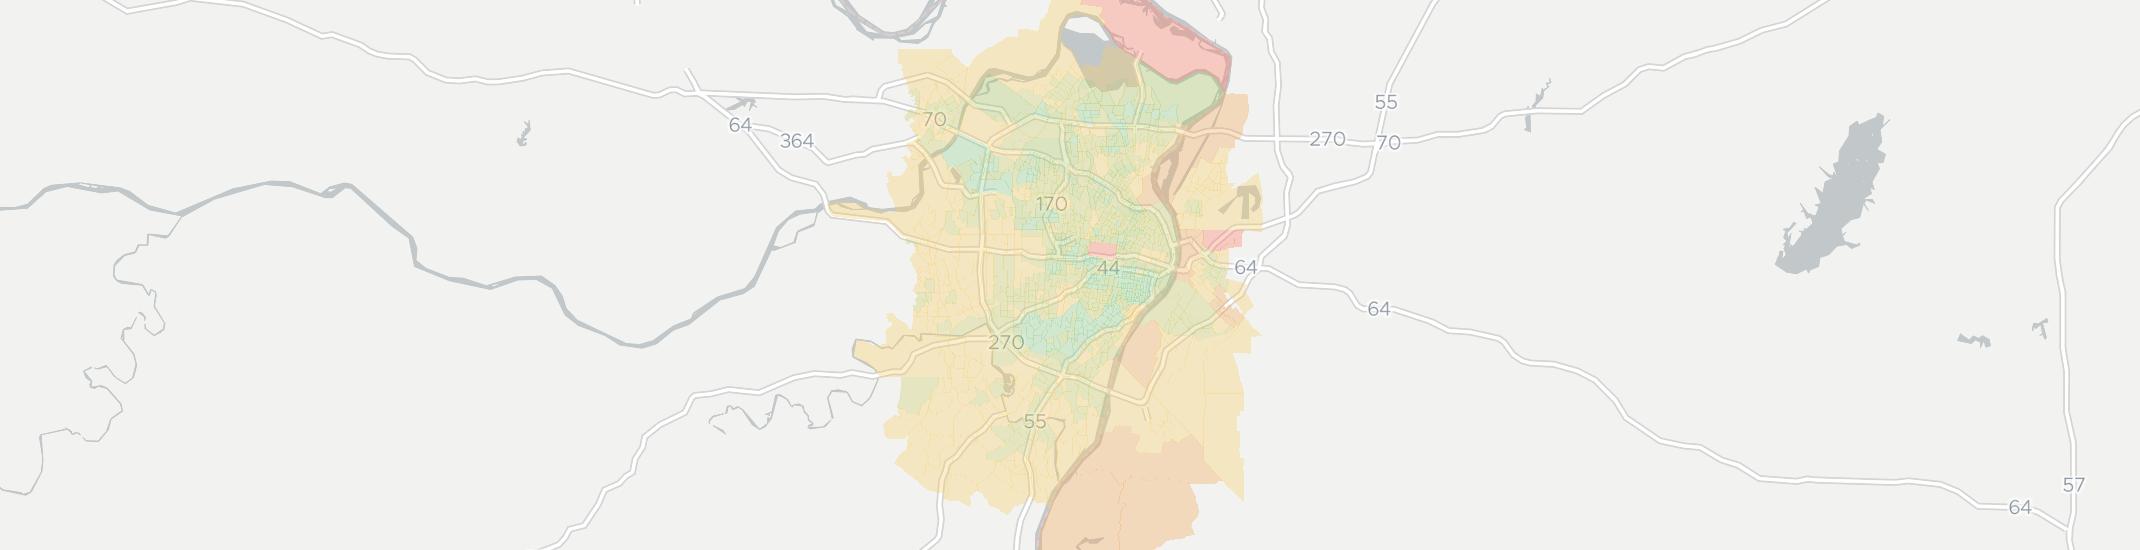 St. Louis Internet Competition Map. Click for interactive map.